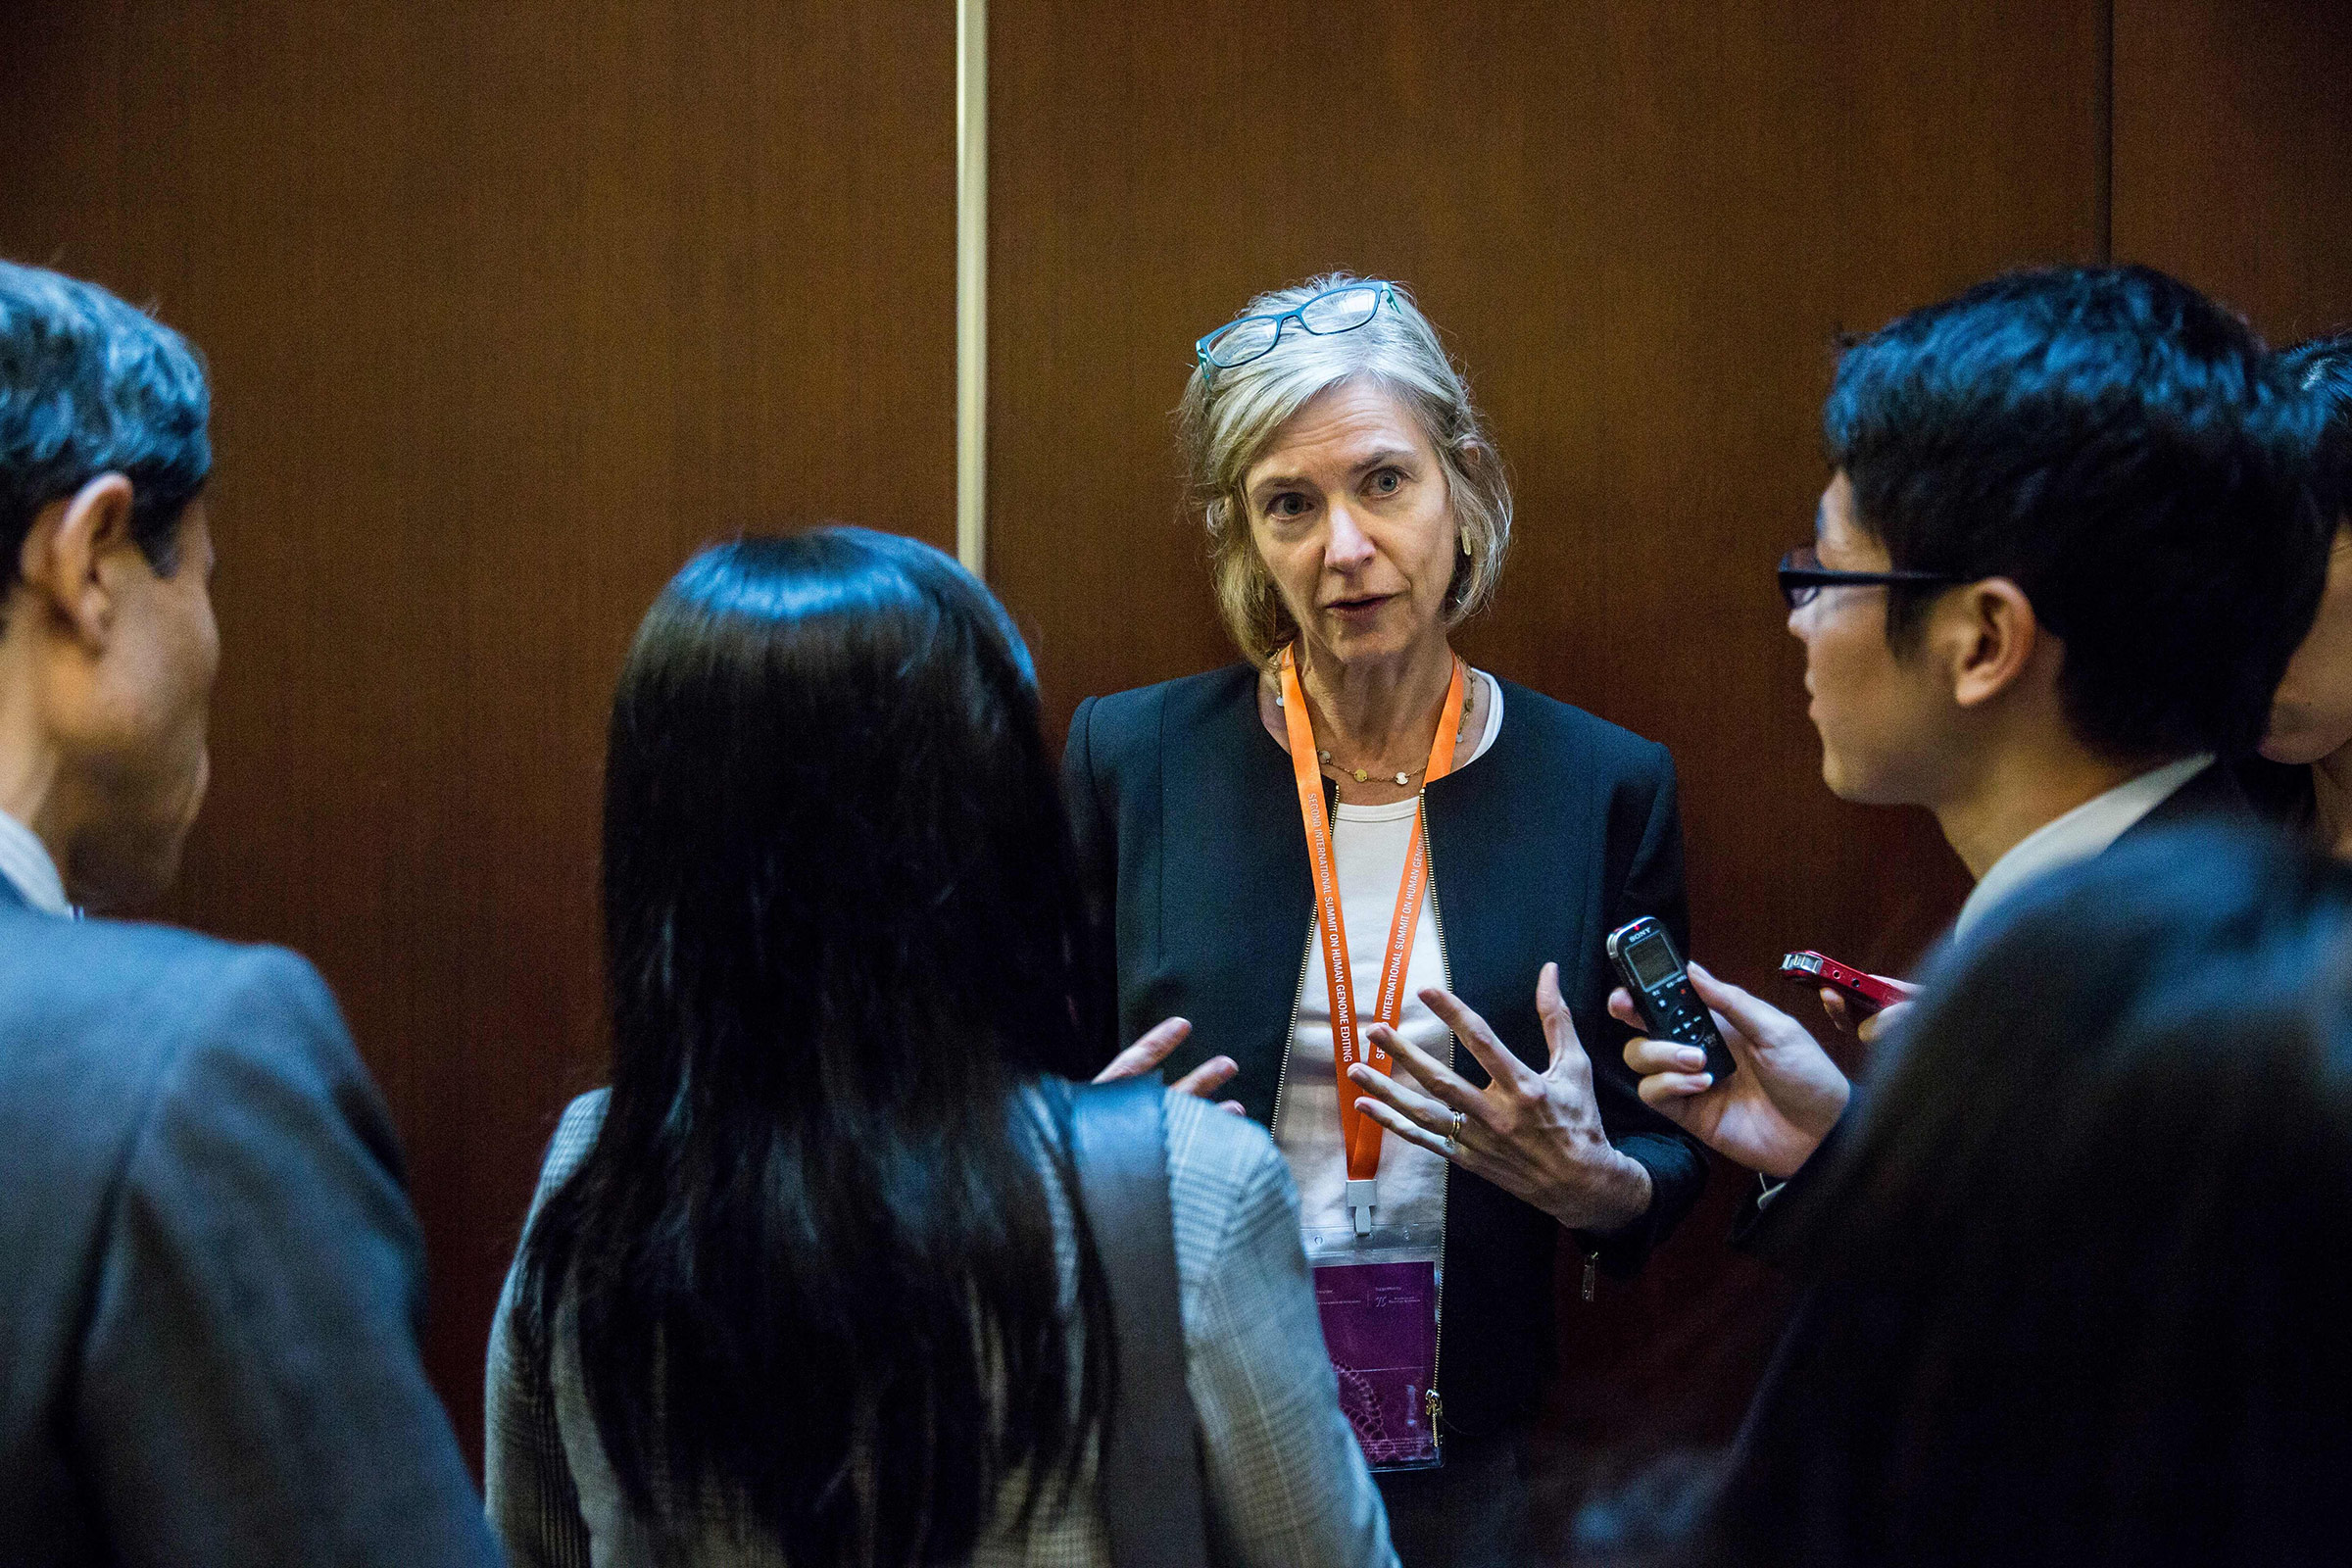 Jennifer Doudna, center, is interviewed during the Second International Summit on Human Genome Editing in Hong Kong, on Nov. 27, 2018. (Isaac Lawrence—AFP/Getty Images)